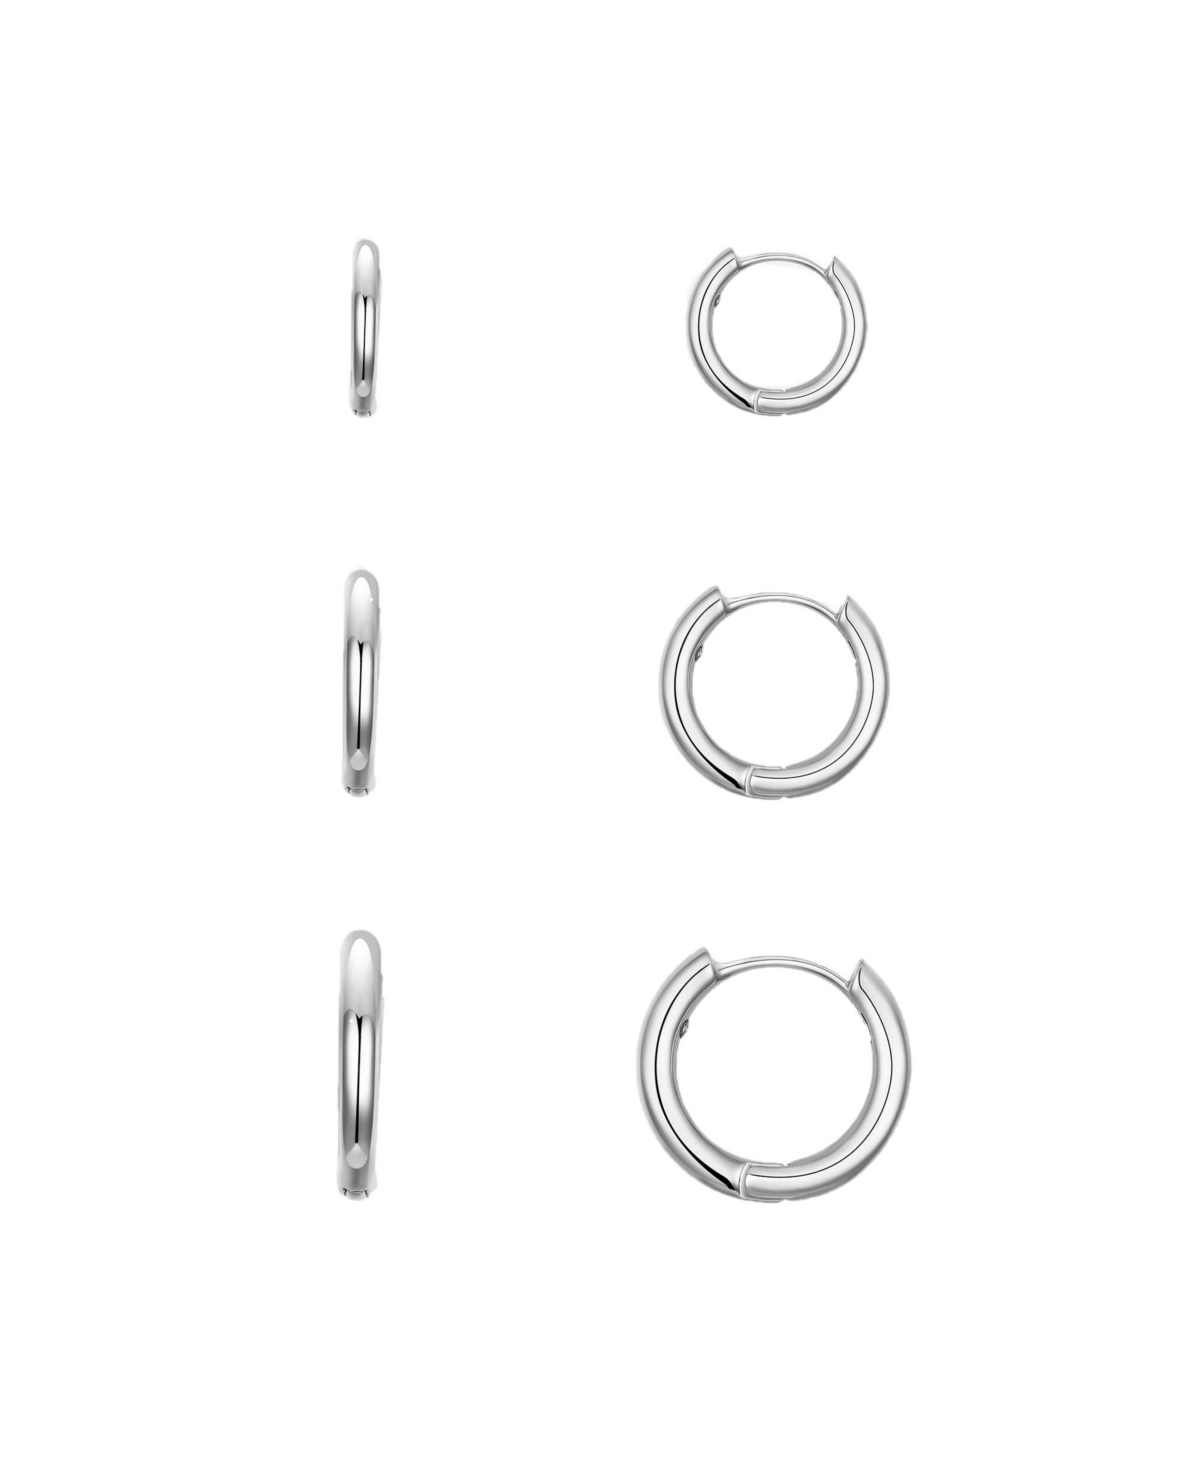 Silver-Tone or Gold-Tone Stainless Steel Endless Hoop Earring Set - Gold